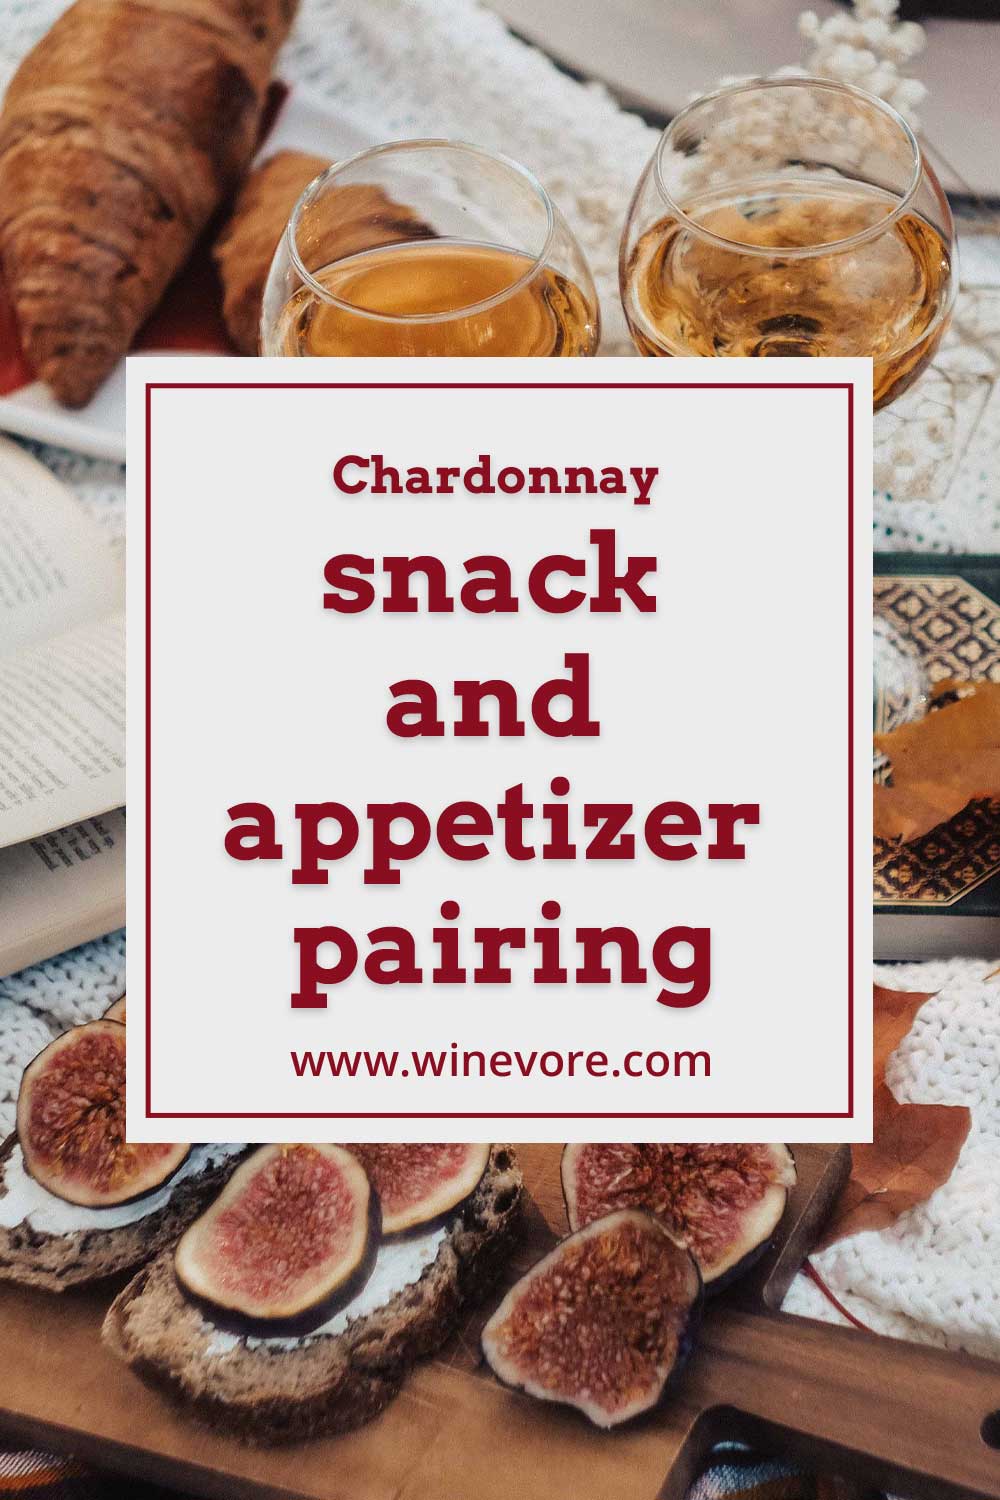 Wine glasses with food on a table - Chardonnay snack and appetizer pairing.